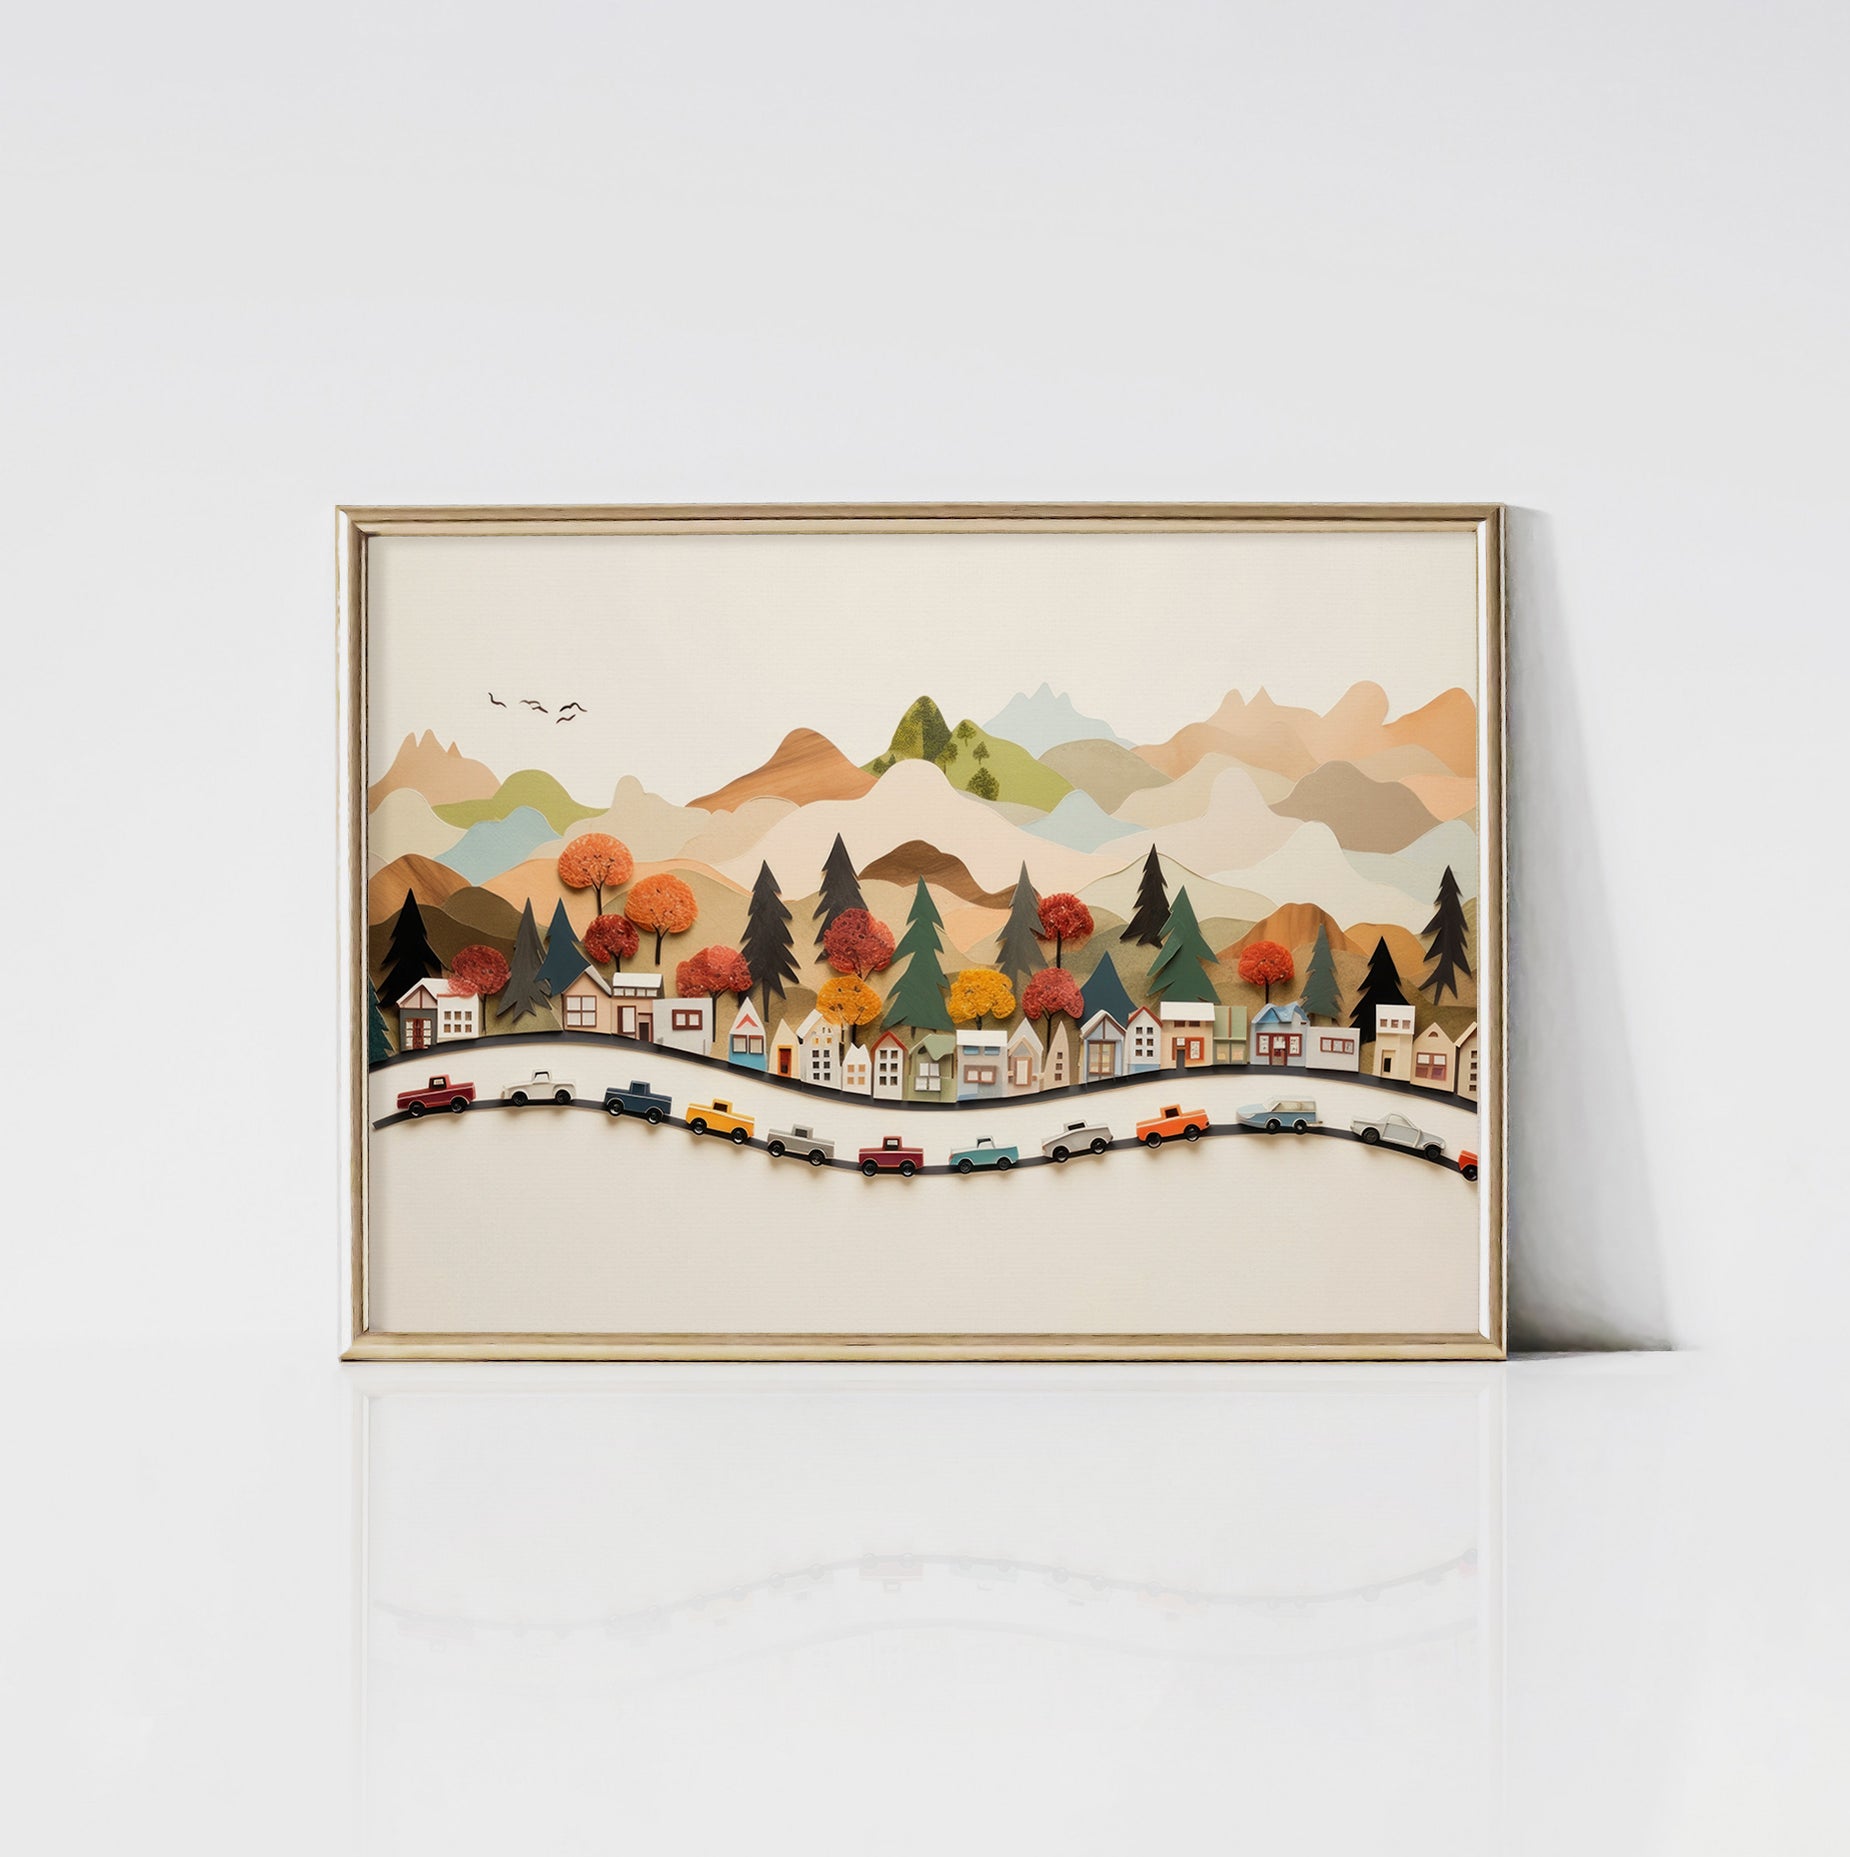 An art print encased in a sleek gold frame, depicting a charming village with colorful cars on a sinuous road, set against a picturesque landscape of hills and mountains. The gold frame adds a touch of elegance to the playful artwork.